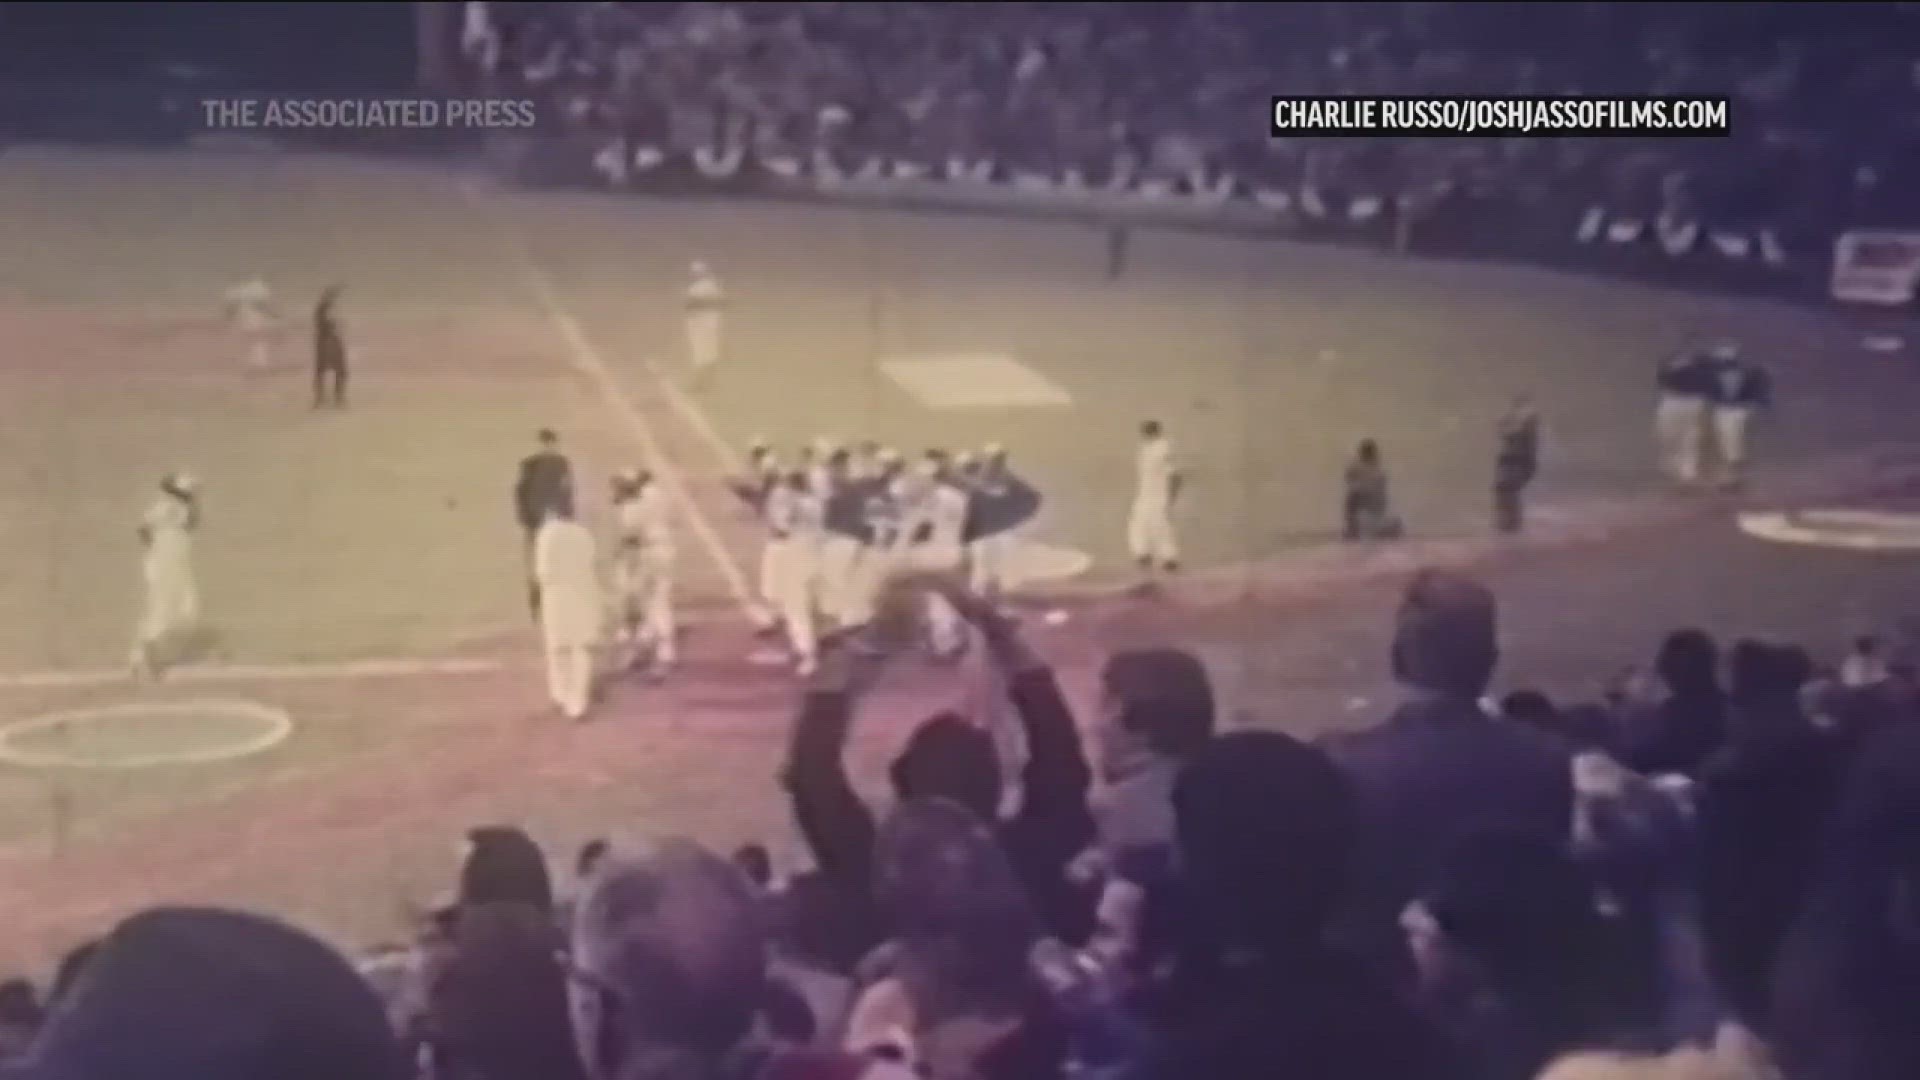 Monday marks 50 years since Hank Aaron's 715th home run | 11alive.com